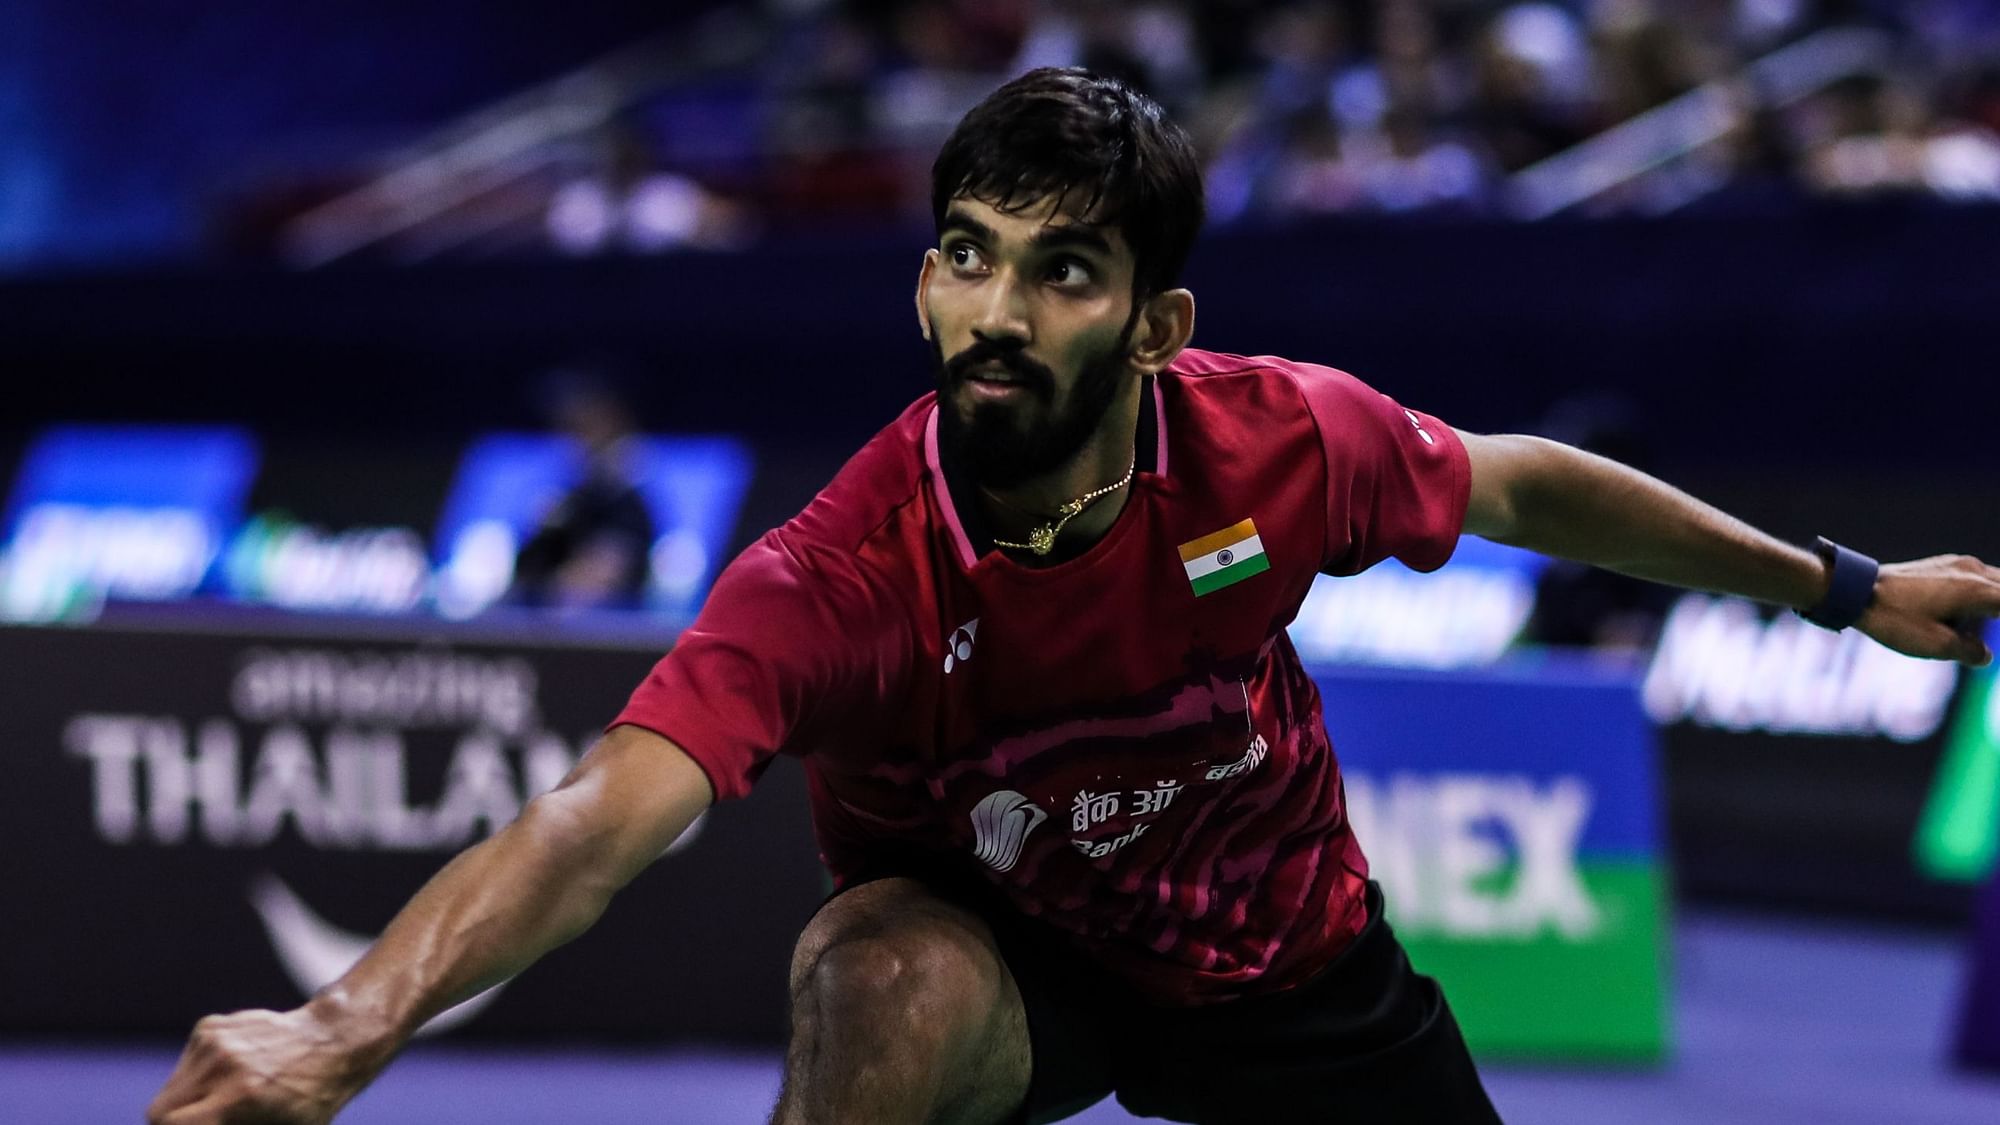 Kidambi Srikanth has pulled out of the upcoming Premier Badminton League (PBL) to focus on 2020.